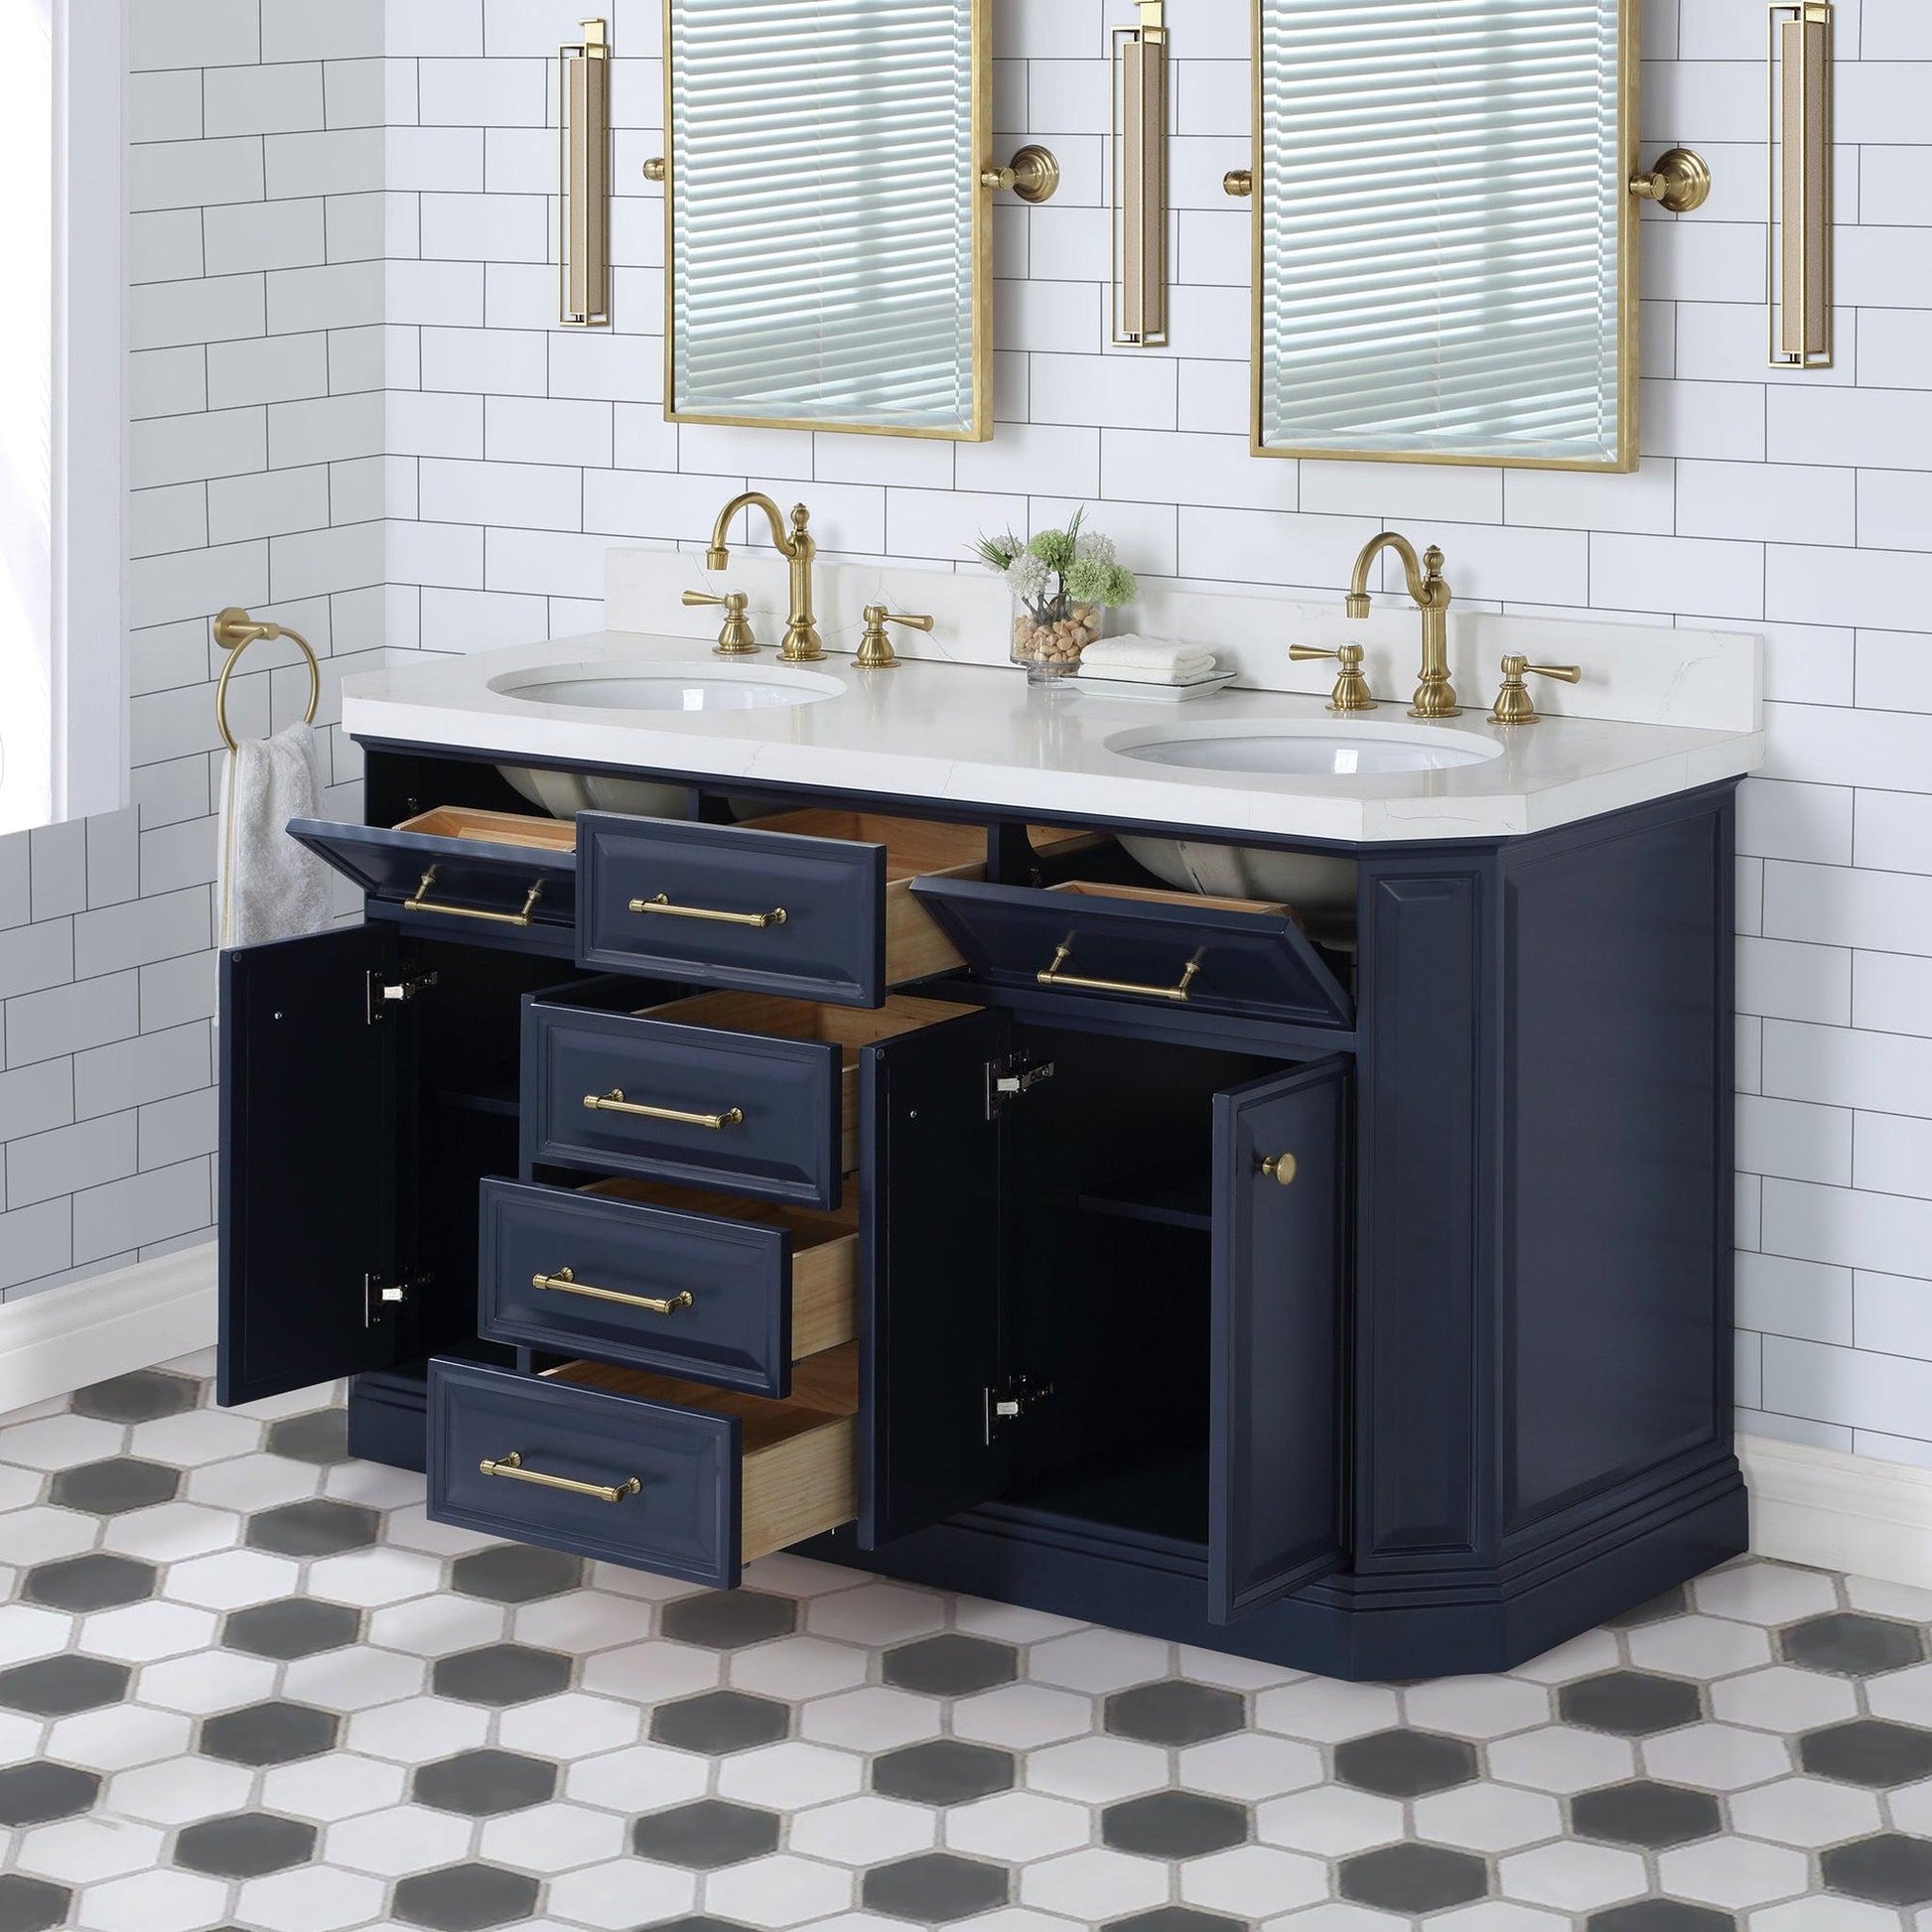 Water Creation Palace 60" Double Sink White Quartz Countertop Vanity in Monarch Blue and Mirrors